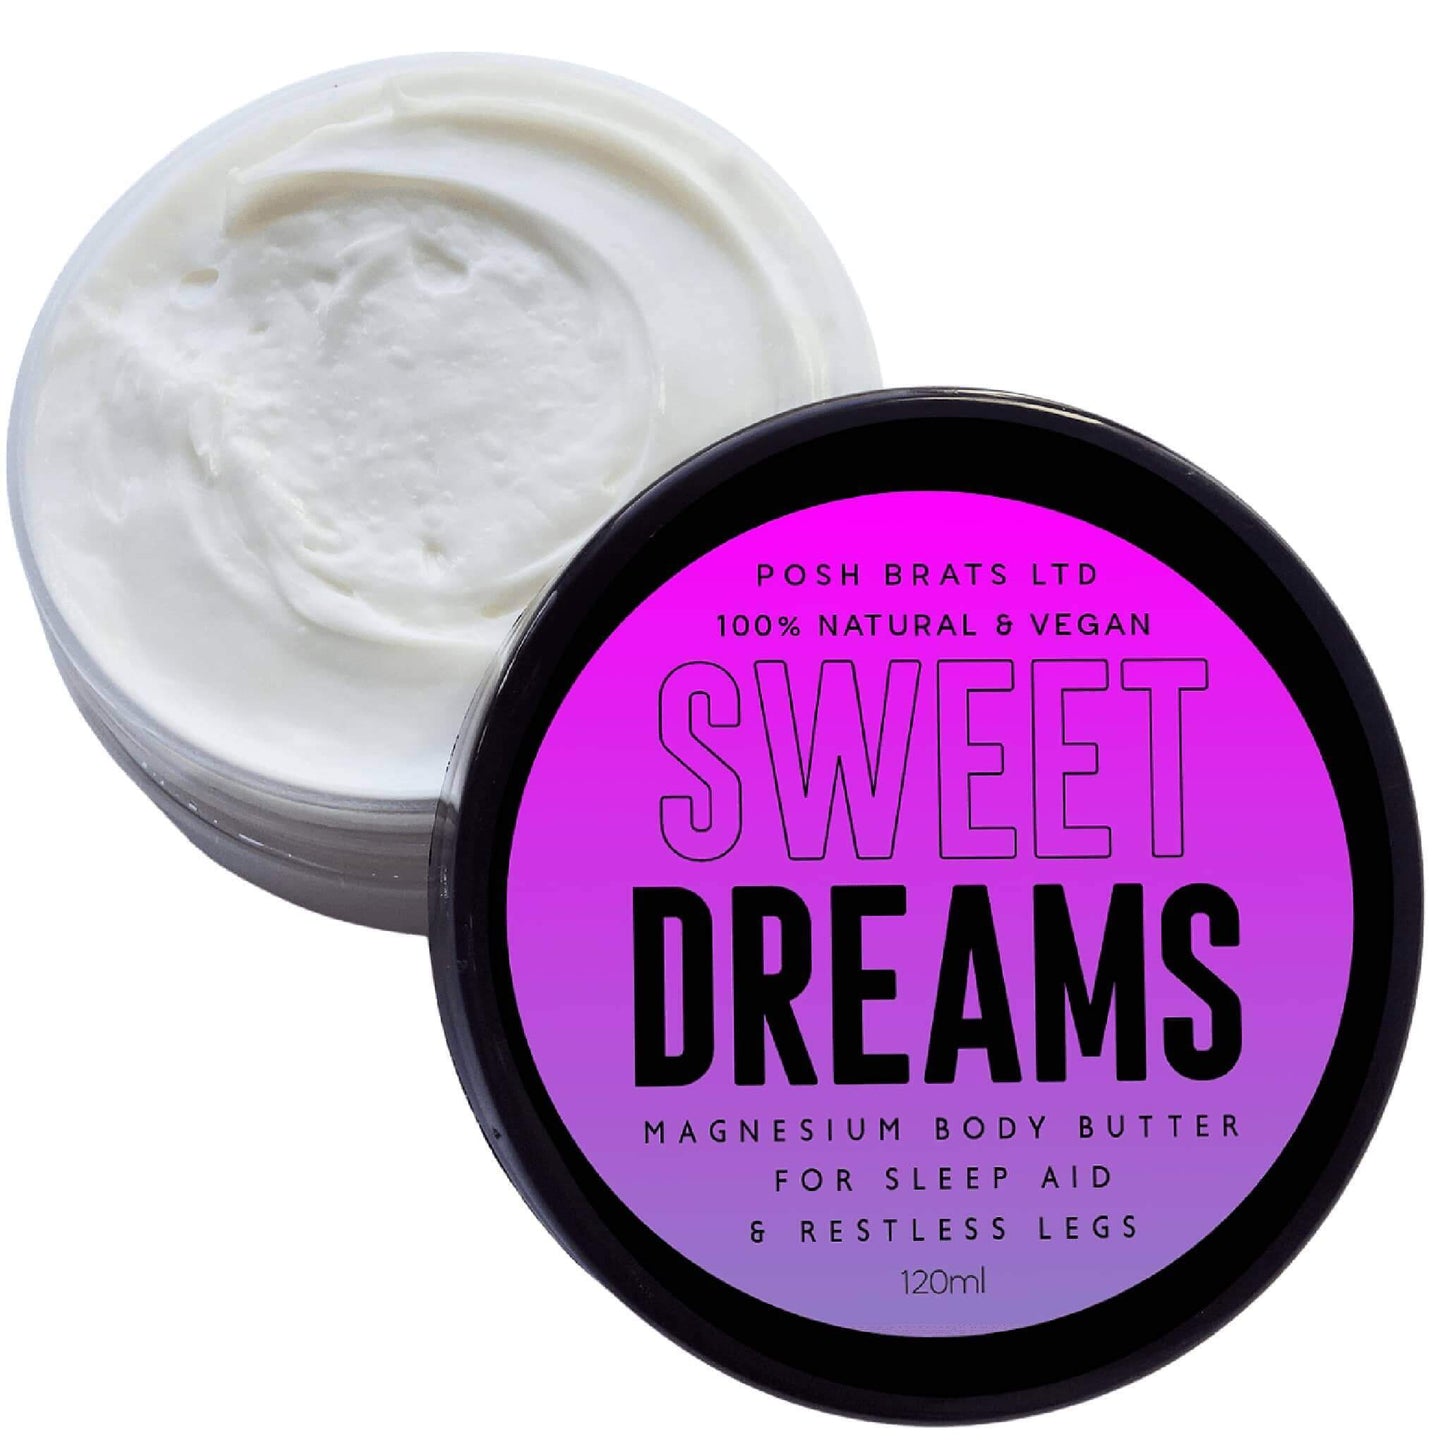 Sweet Dreams Magnesium Body Butter is your answer to peaceful nights. Our soothing sleep aide body butter is a must-try!